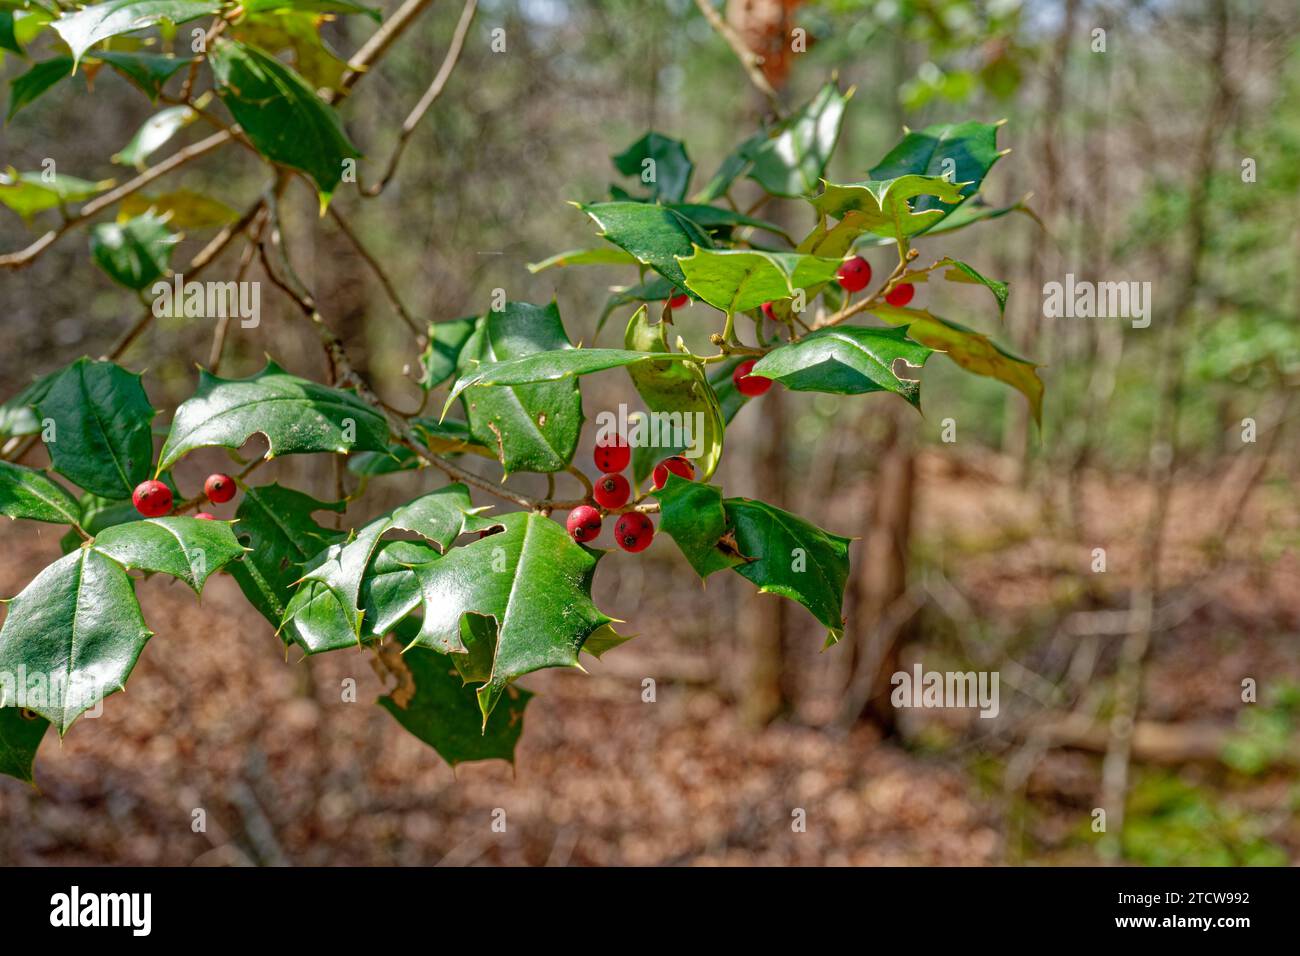 A branch closeup of a holly plant with clusters of red berries alongside the pointy foliage with the woodlands in the background on a sunny day in ear Stock Photo